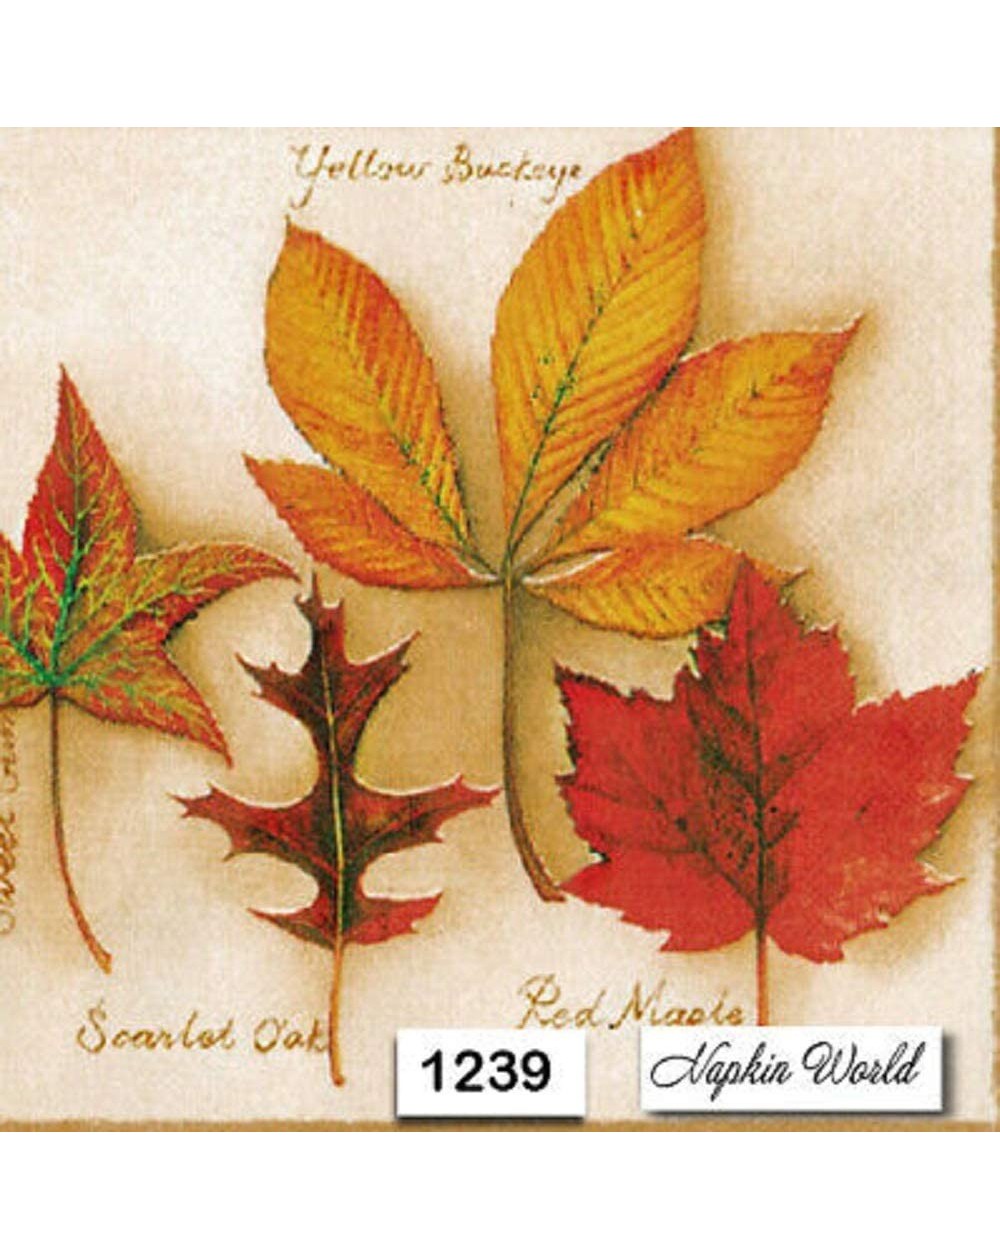 Tableware Two Individual Paper Luncheon Decoupage Napkins - Leaves Autumn Fall - C219DE37A24 $16.16